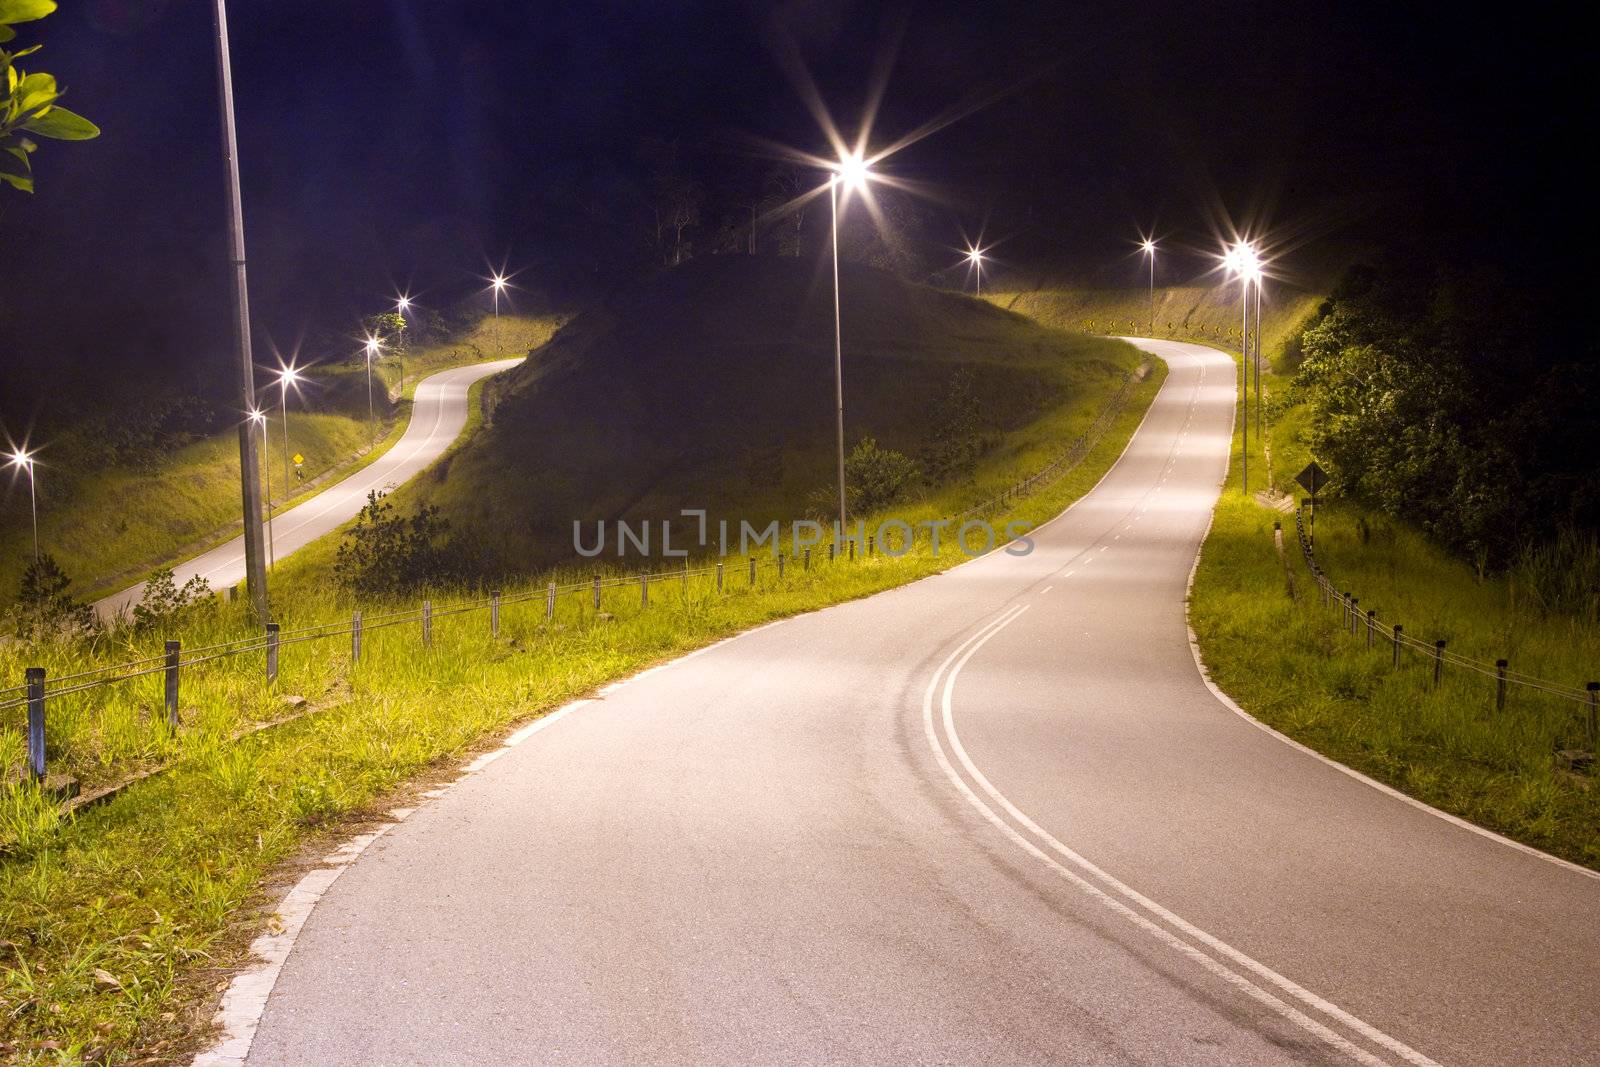 Tropical Country Road at Night by shariffc